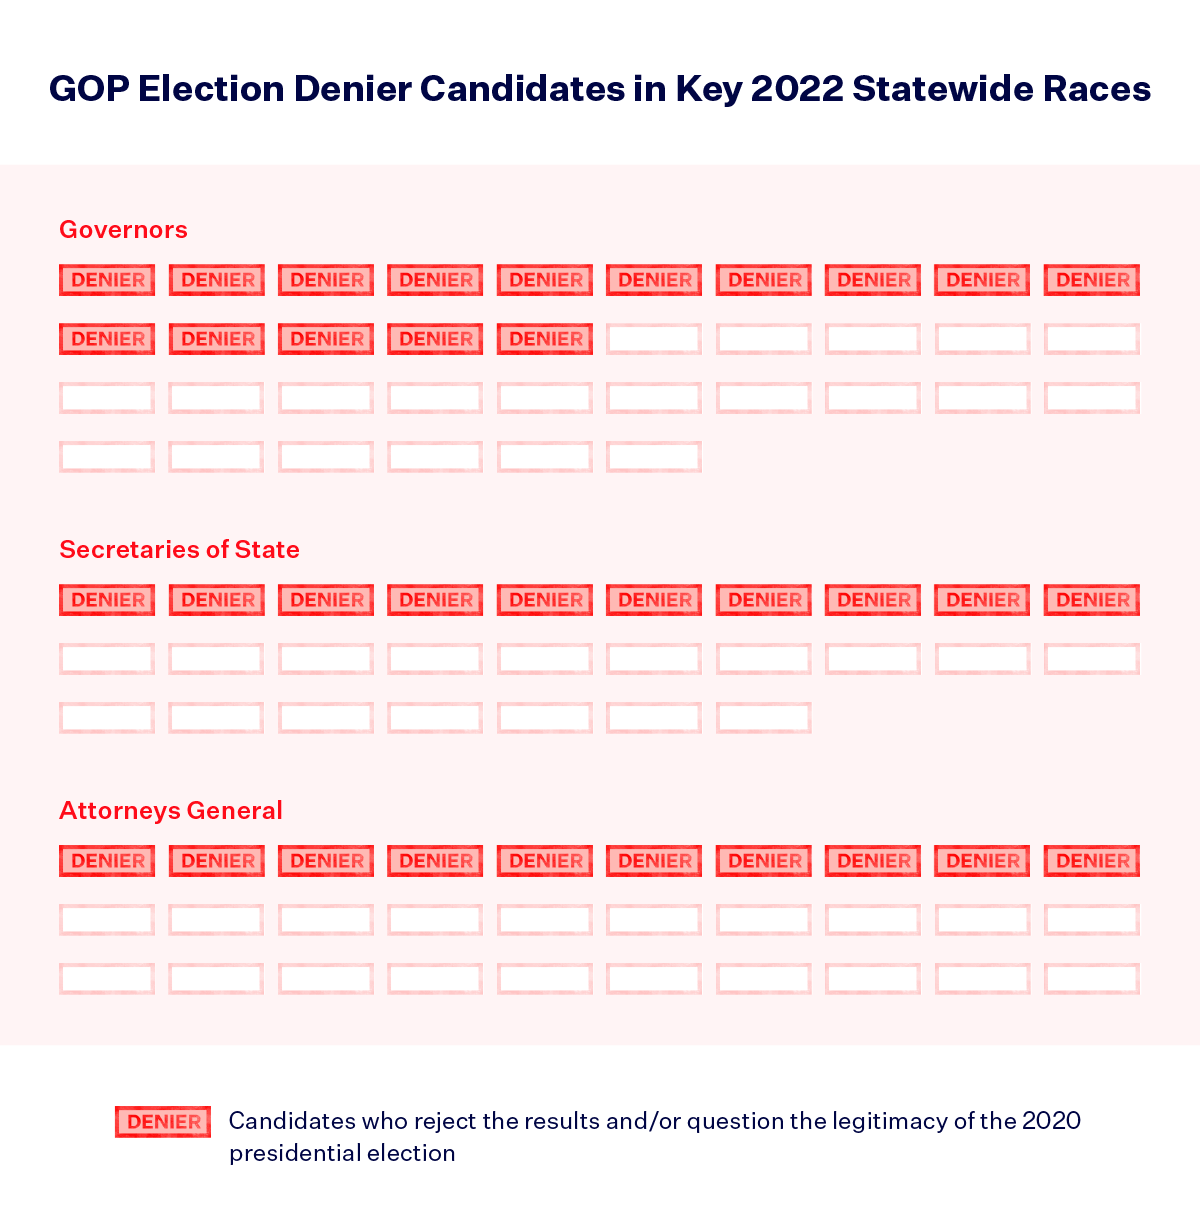 Graphic with the title “GOP Election Denier Candidates in Key 2022 Statewide Races.” In the Governor category, there are 36 total boxes, 15 of which have a red “DENIER” stamp. In the Secretaries of State category, 10 out of 27 boxes have the “DENIER” stamp. In the Attorneys General category, 10 out of 30 boxes have the “DENIER” stamp. A key at the bottom shows that the red “DENIER” stamp indicates “Candidates who reject the results and/or question the legitimacy of the 2020 presidential election.”